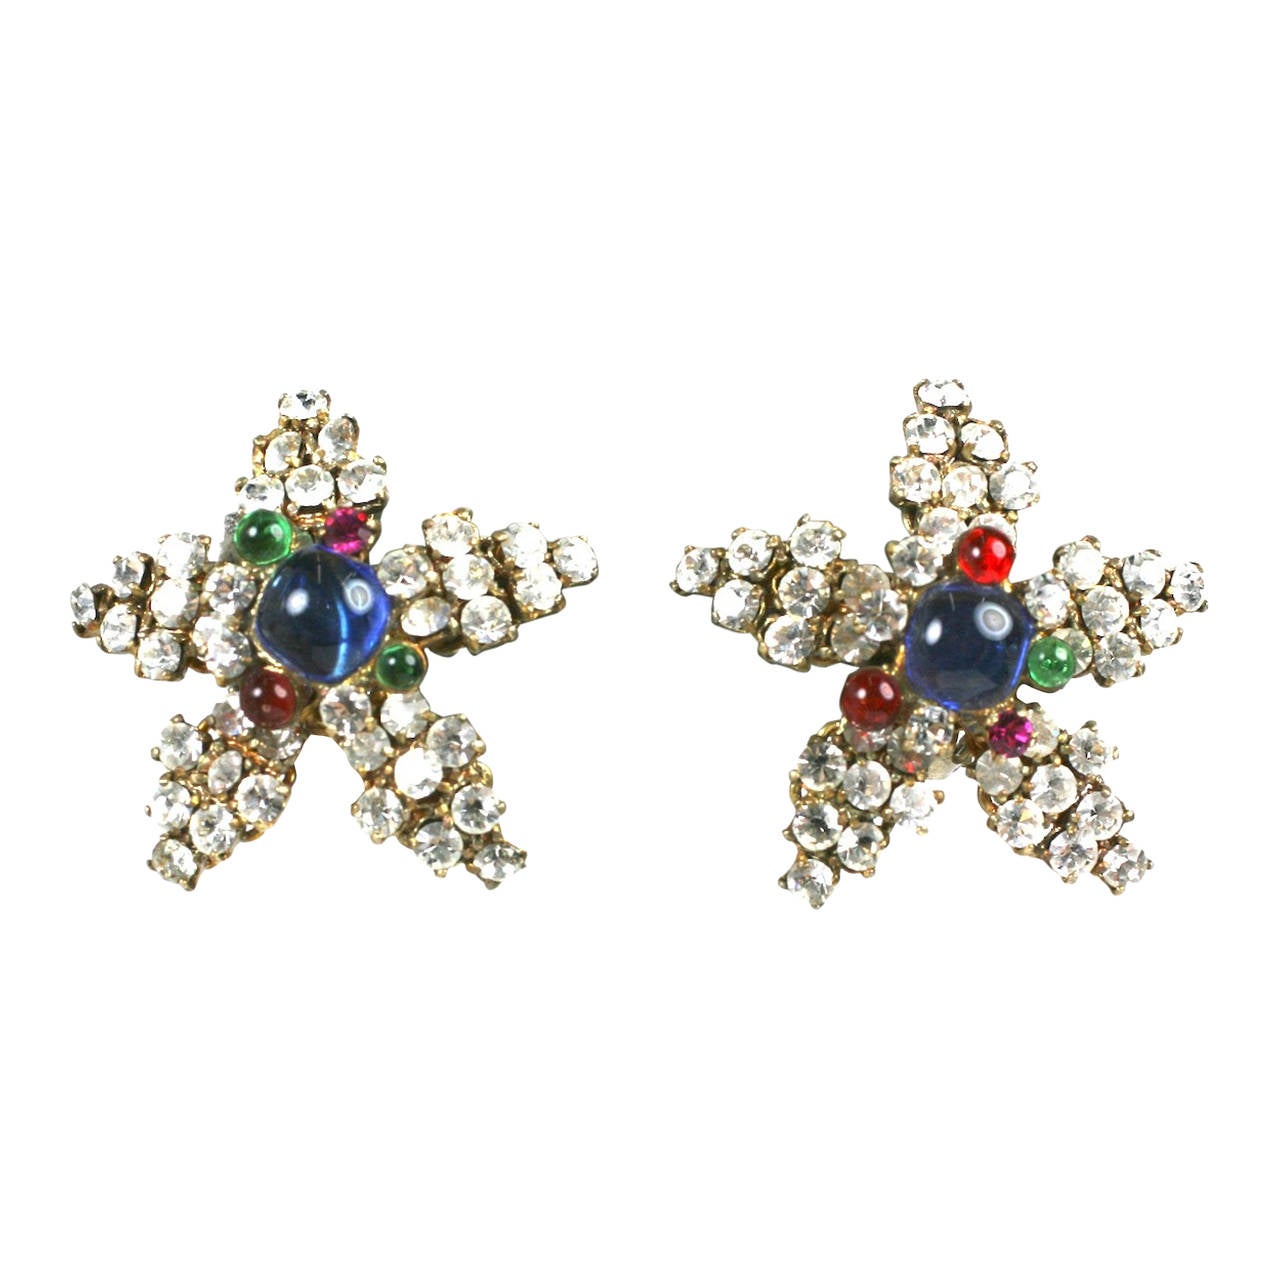  Maison Gripoix for Chanel Poured Glass Pave Star Earrings